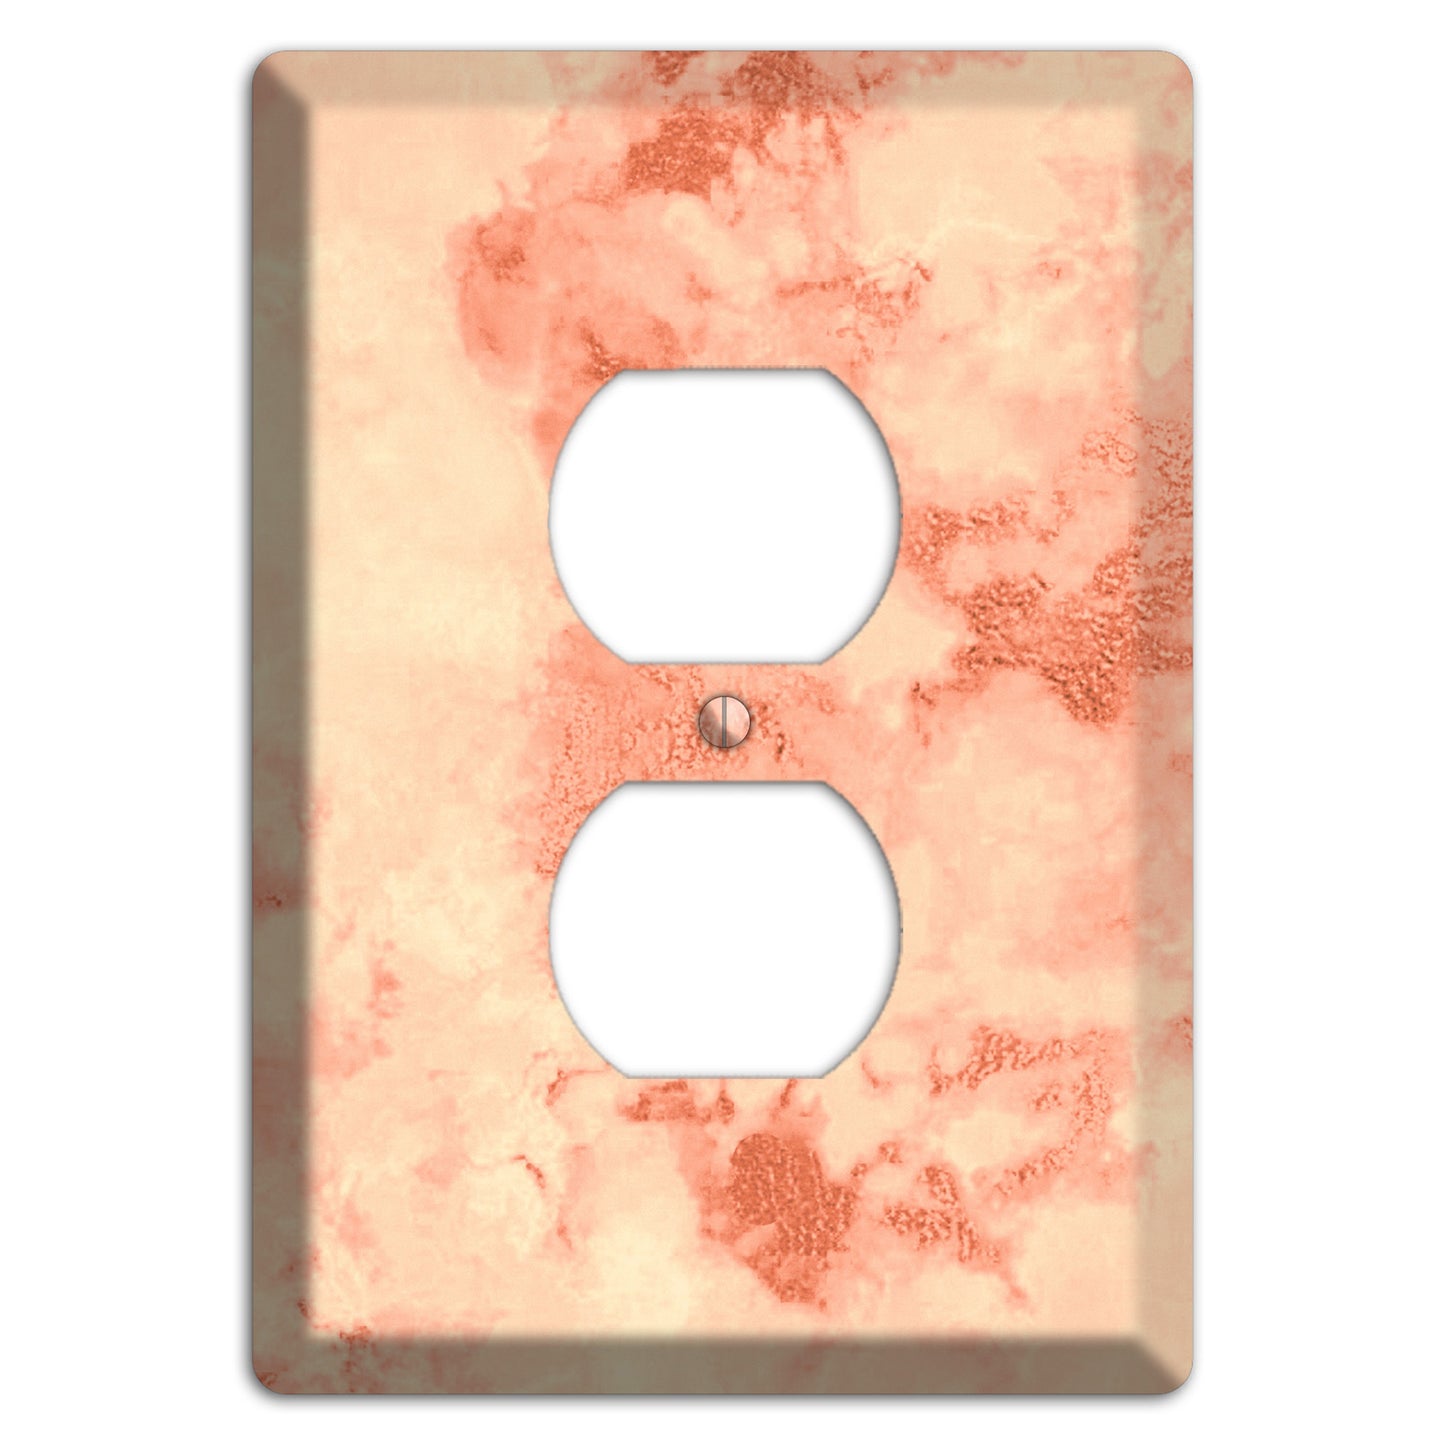 Apricot Peach Marble Duplex Outlet Wallplate